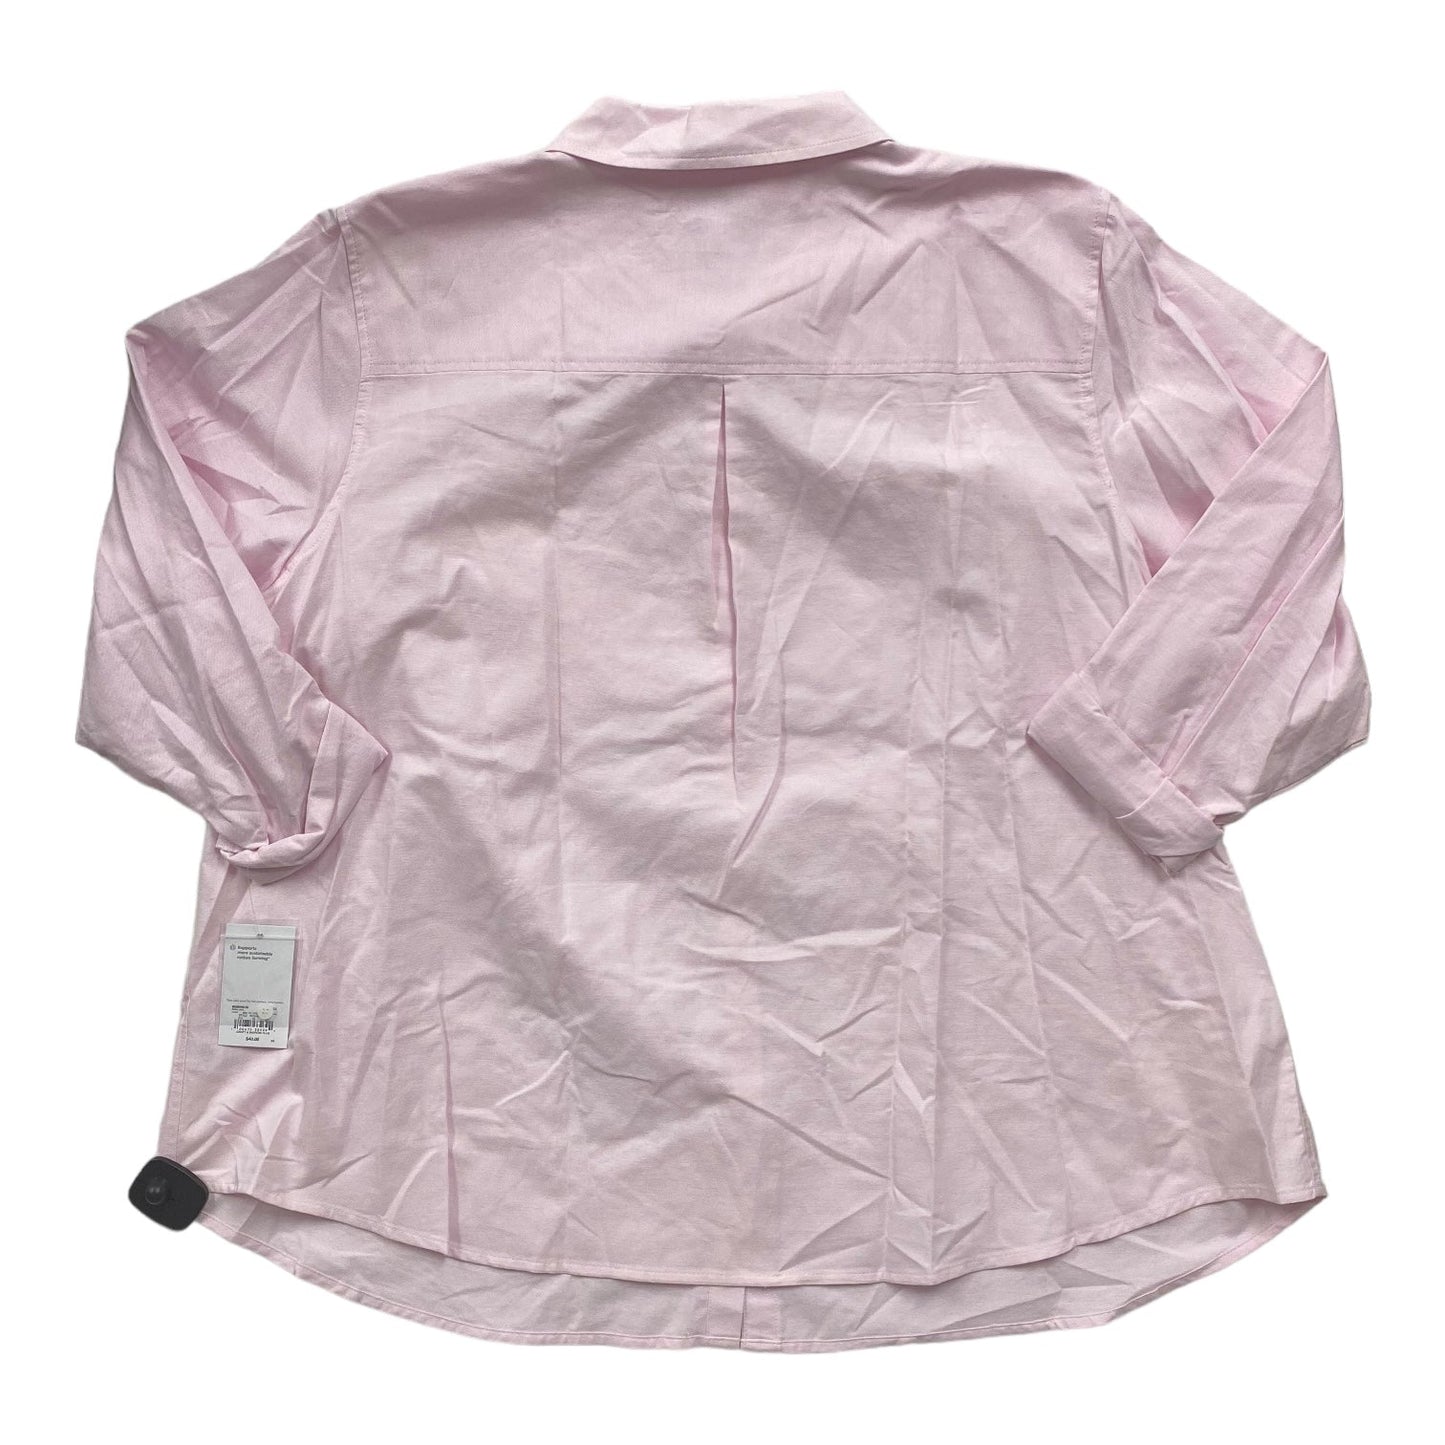 Pink Top Long Sleeve Croft And Barrow, Size 3x